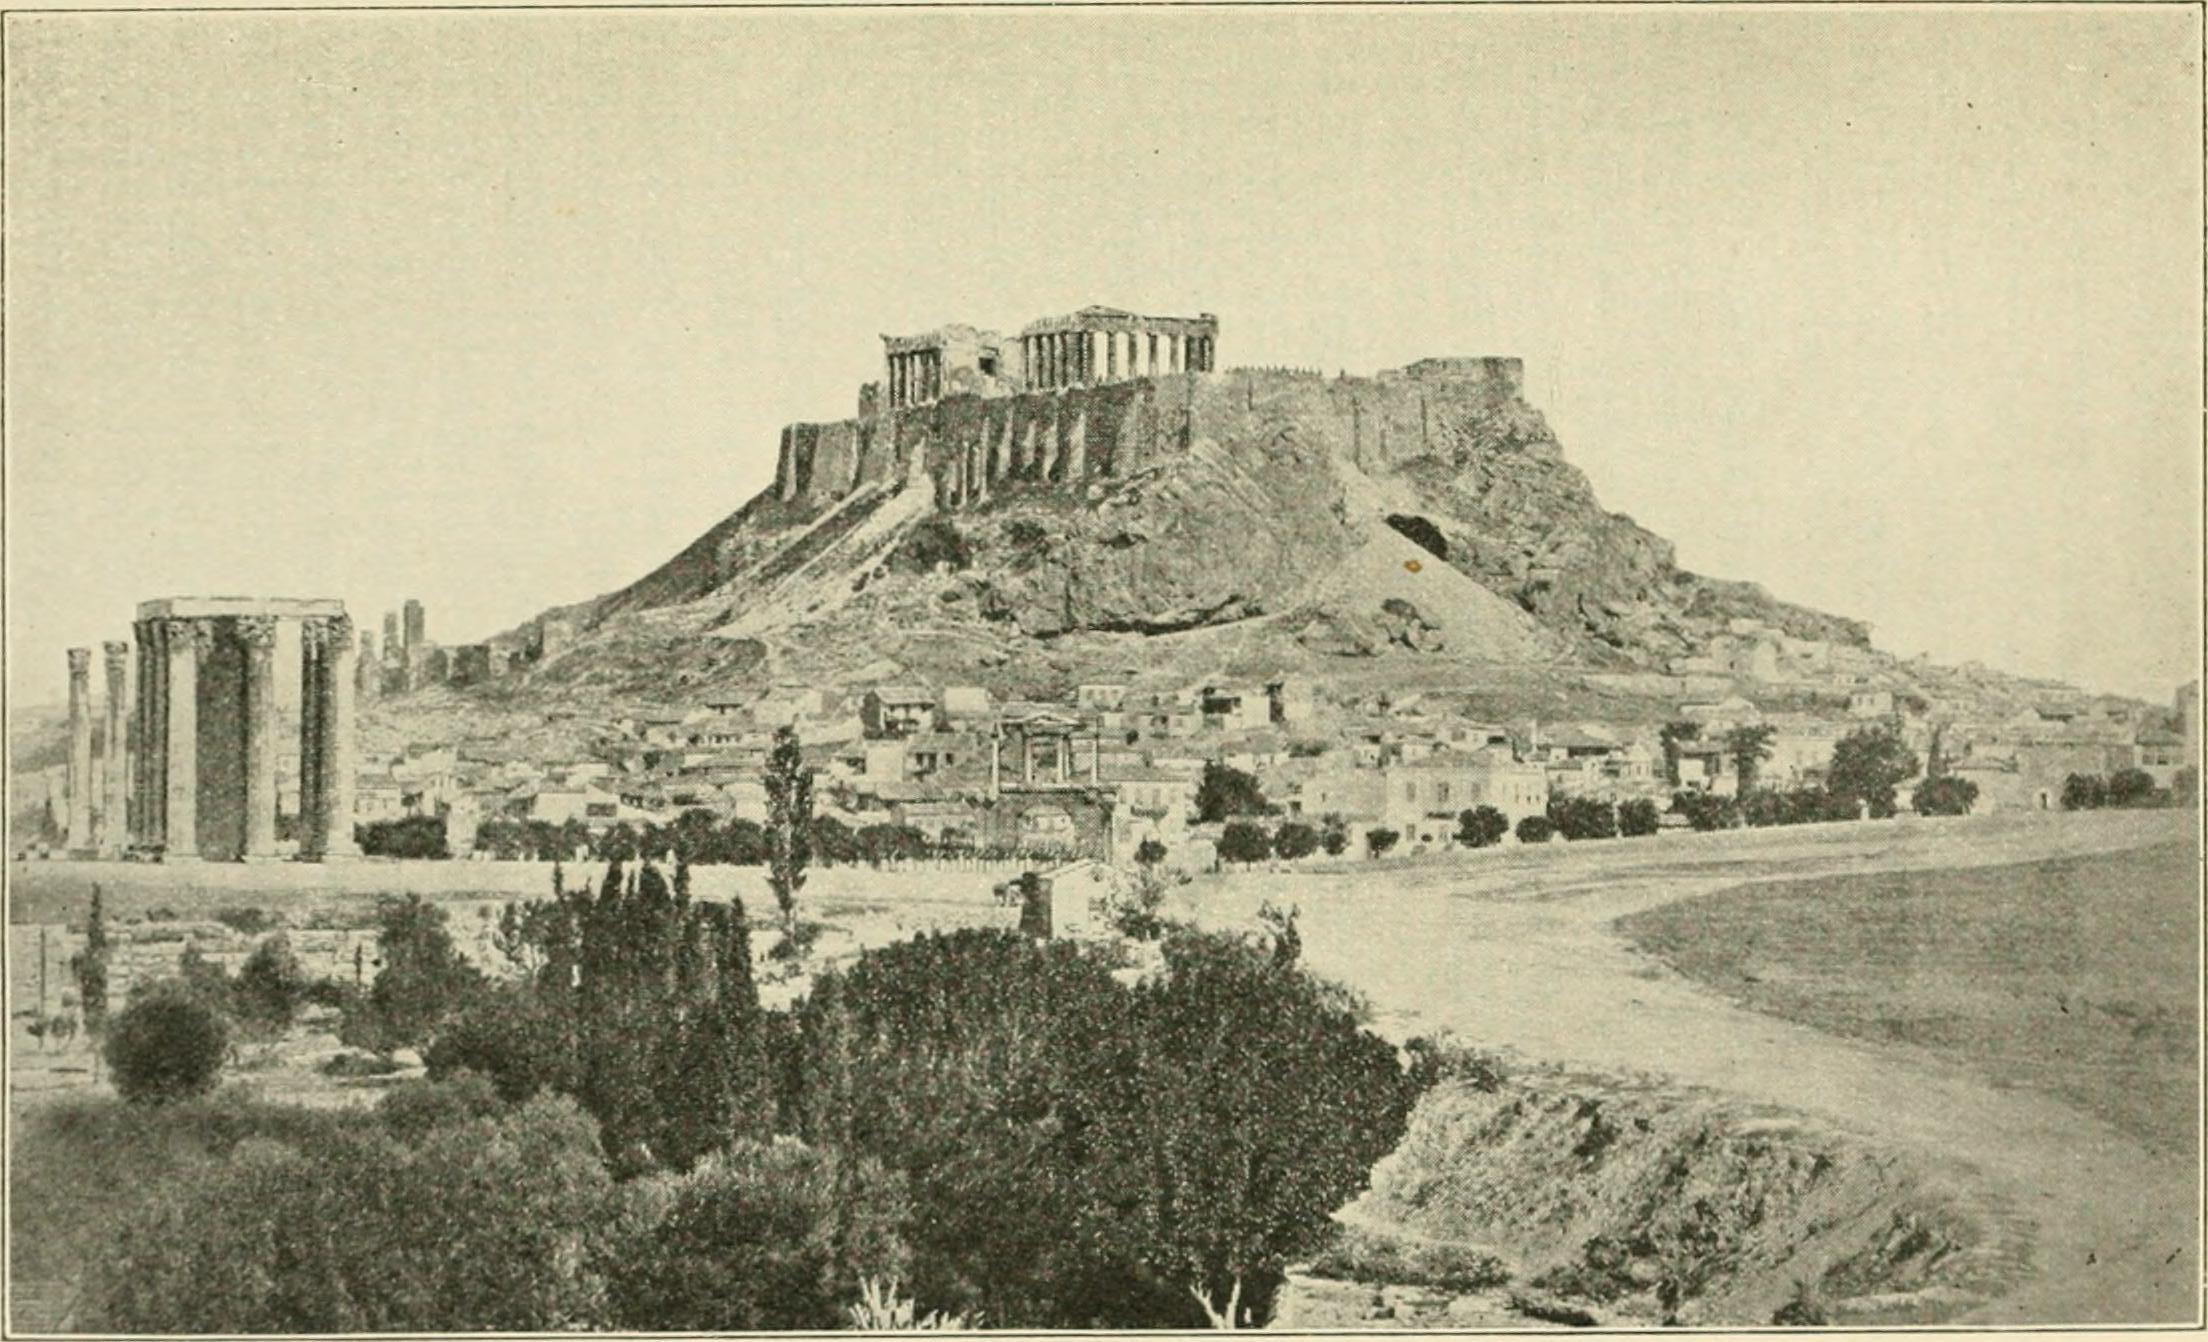 Athens, with the Acropolis in the background, photographed in 1922, three years before Frantz's first visit to the city